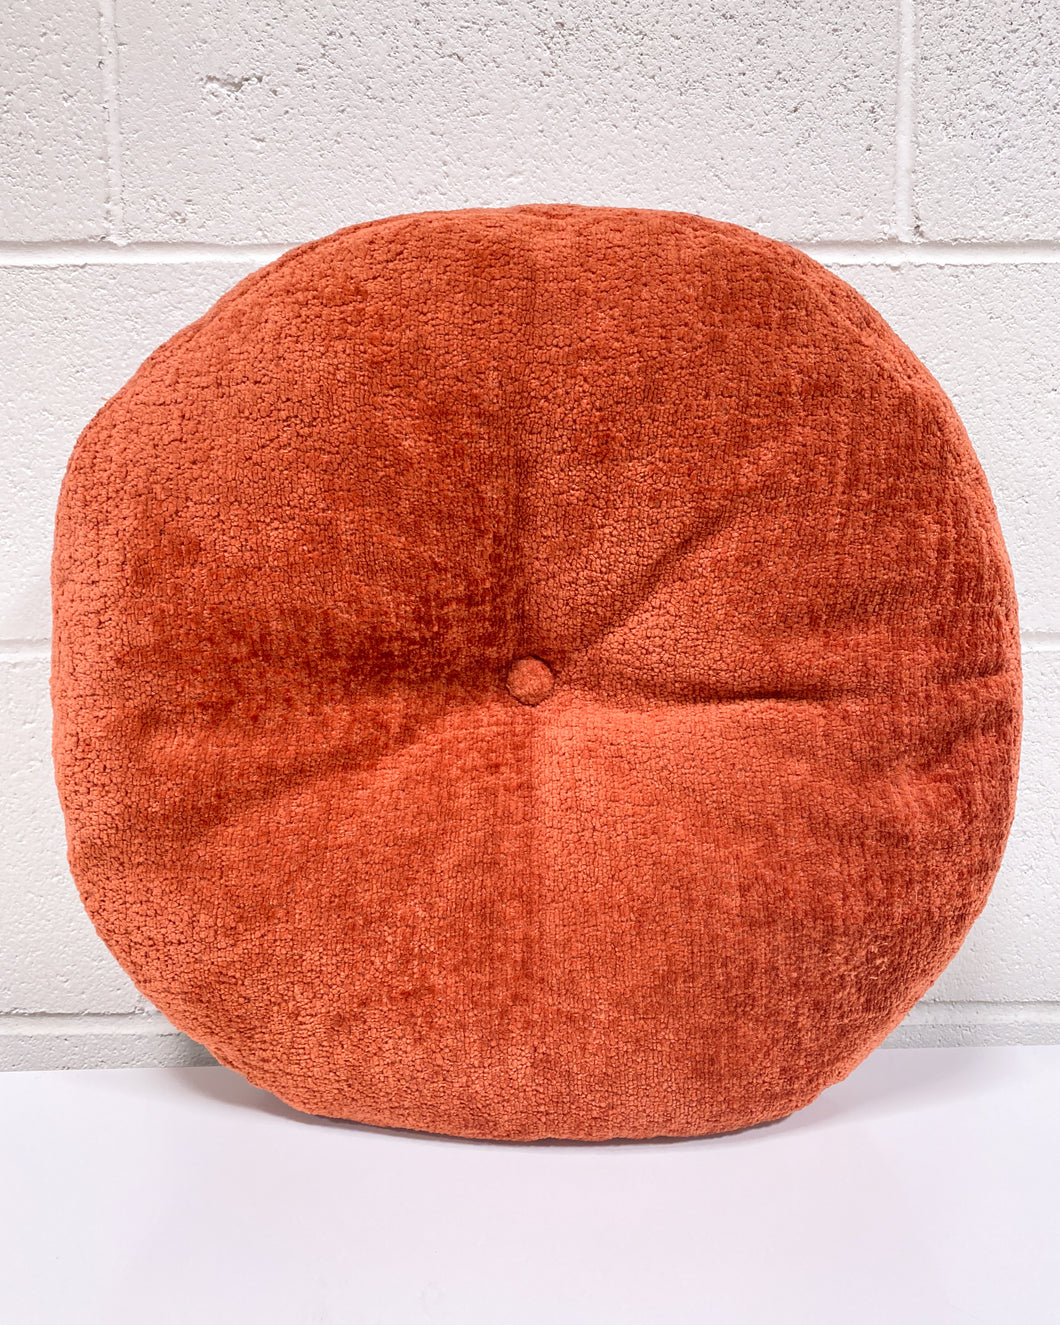 Round Rust Colored Pillow